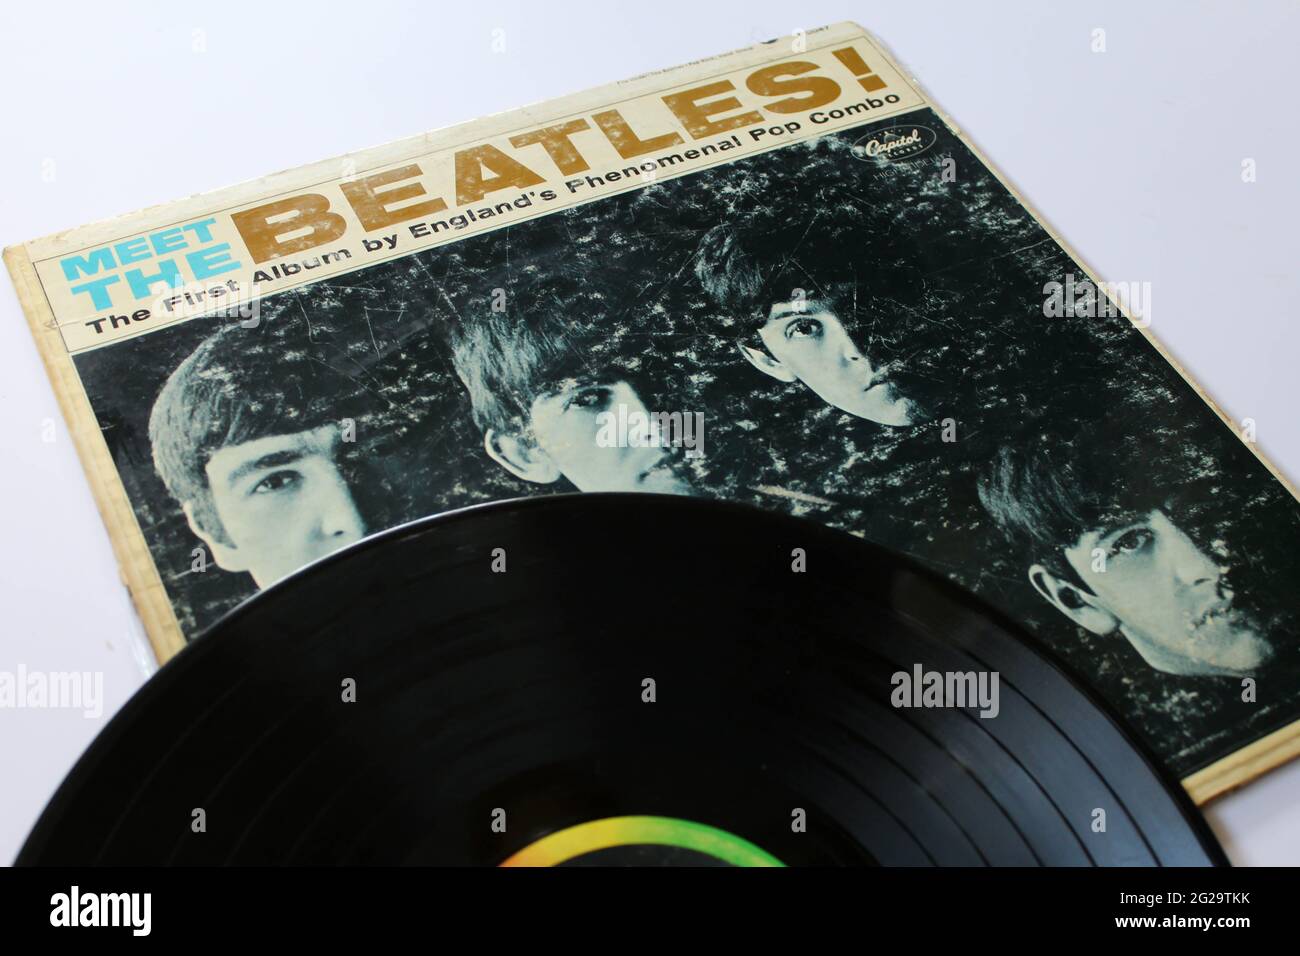 English rock band The Beatles music album on vinyl record LP. Titled Meet the Beatles! This is there first American Album. Album cover Stock Photo